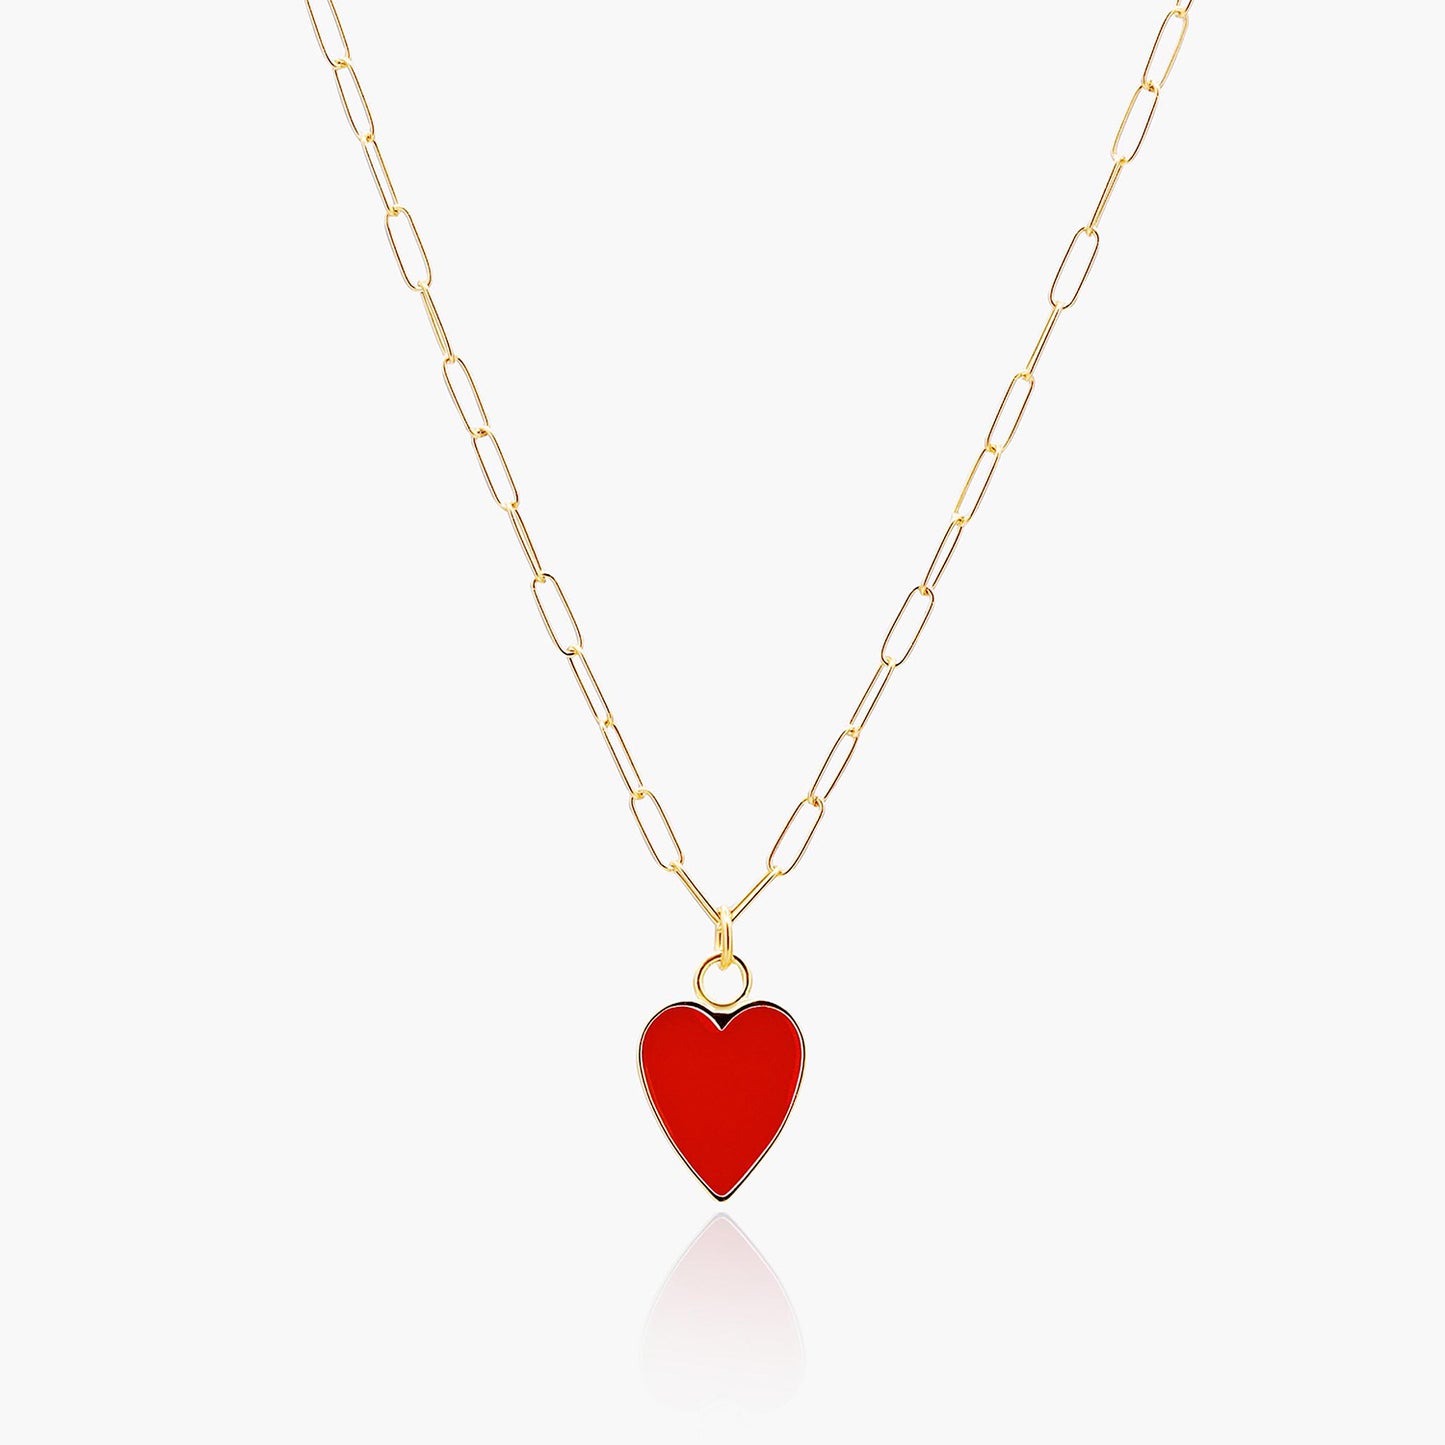 Playa Luna Jewelry Red and Gold Heart Necklace Anna